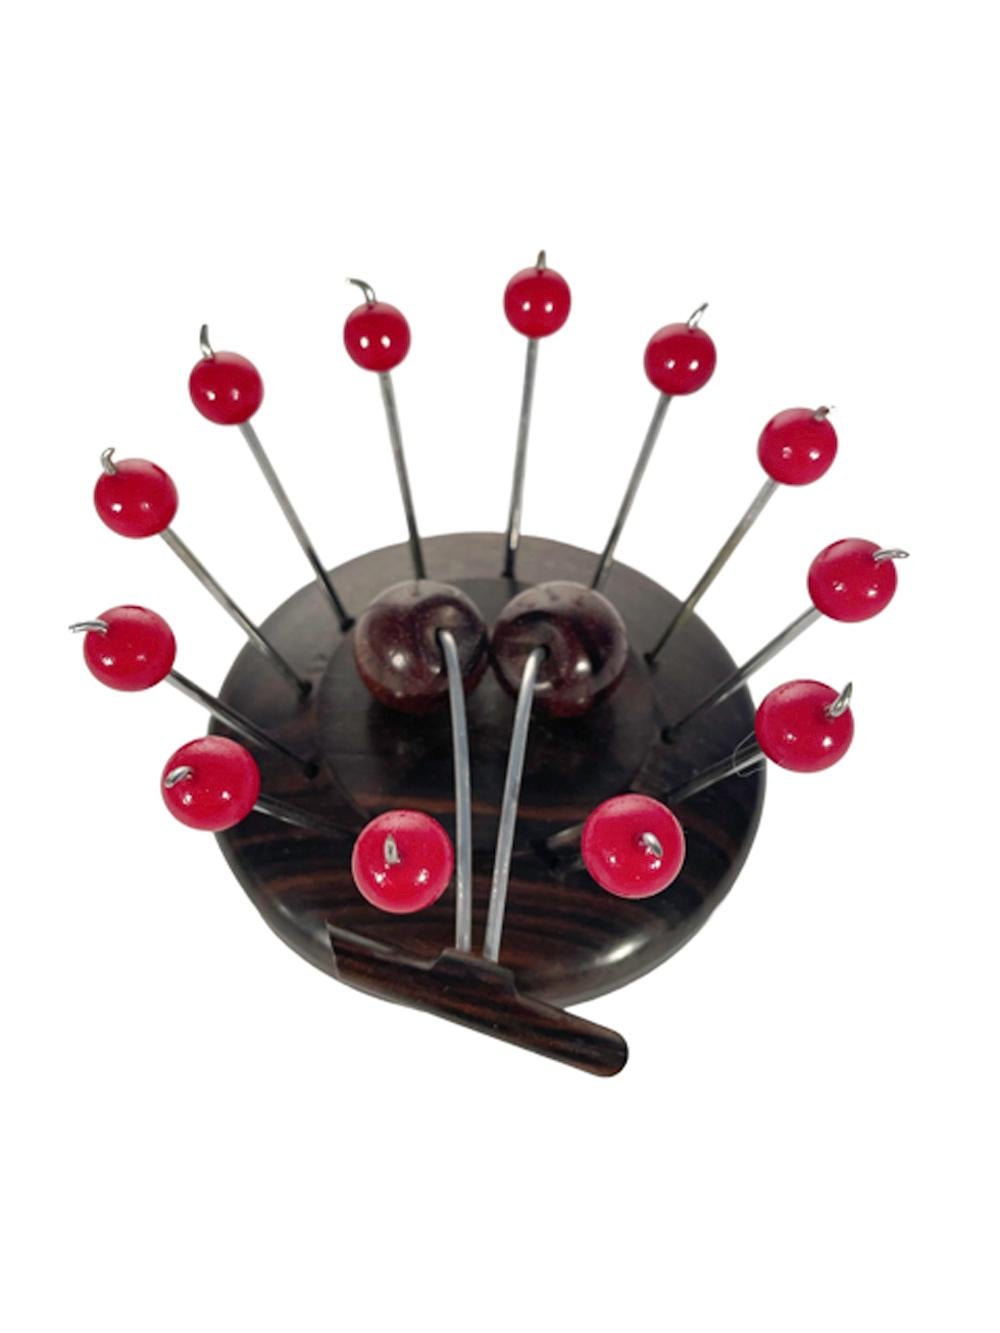 Art Deco Cocktail Pick Set W/Carved Wood Cherry Holder & 12 Cherry Topped Picks In Good Condition For Sale In Nantucket, MA